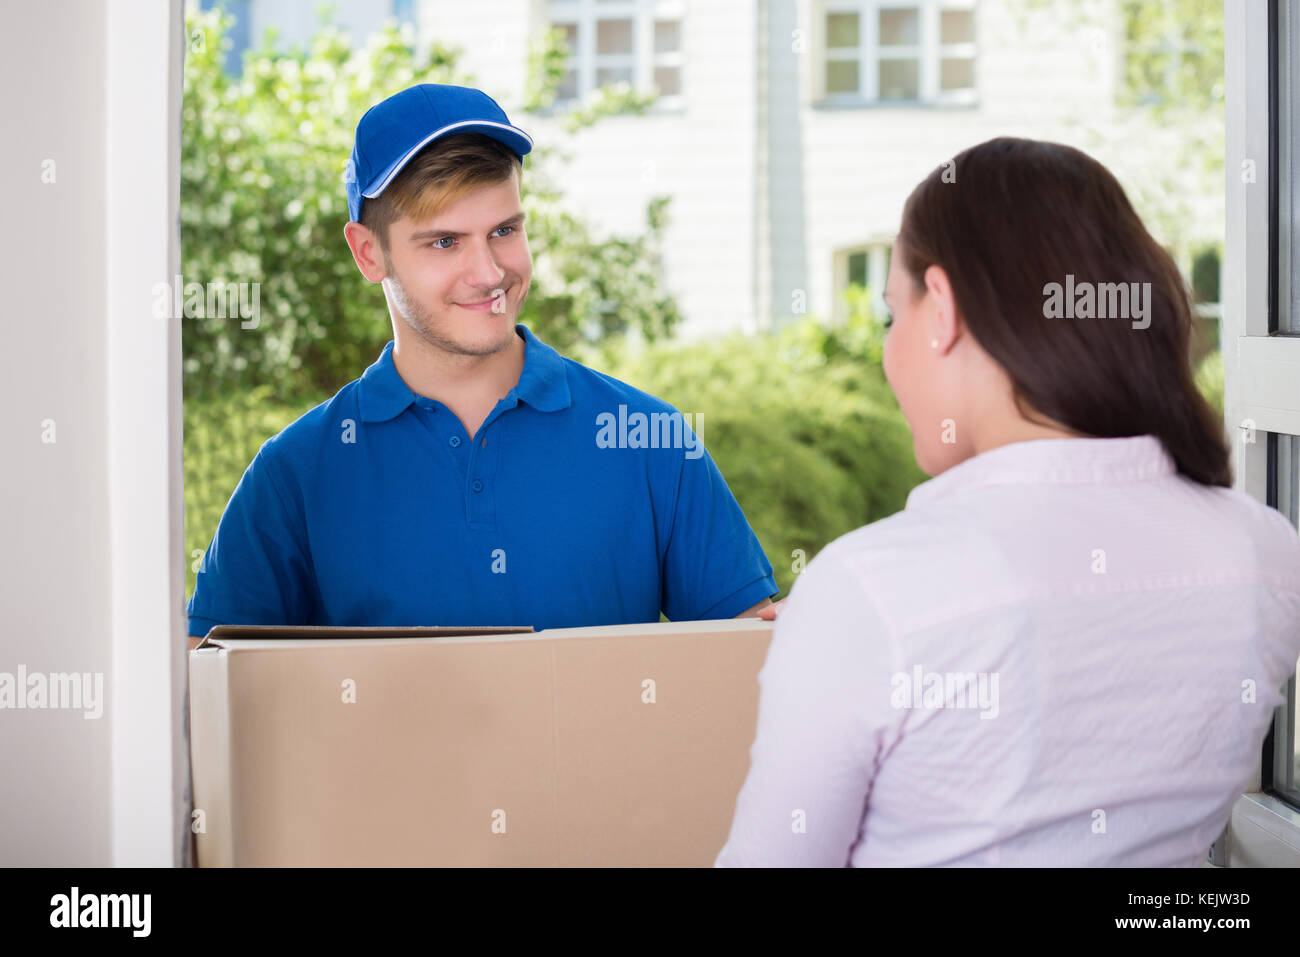 Woman Receiving Package From Happy Delivery Man Stock Photo